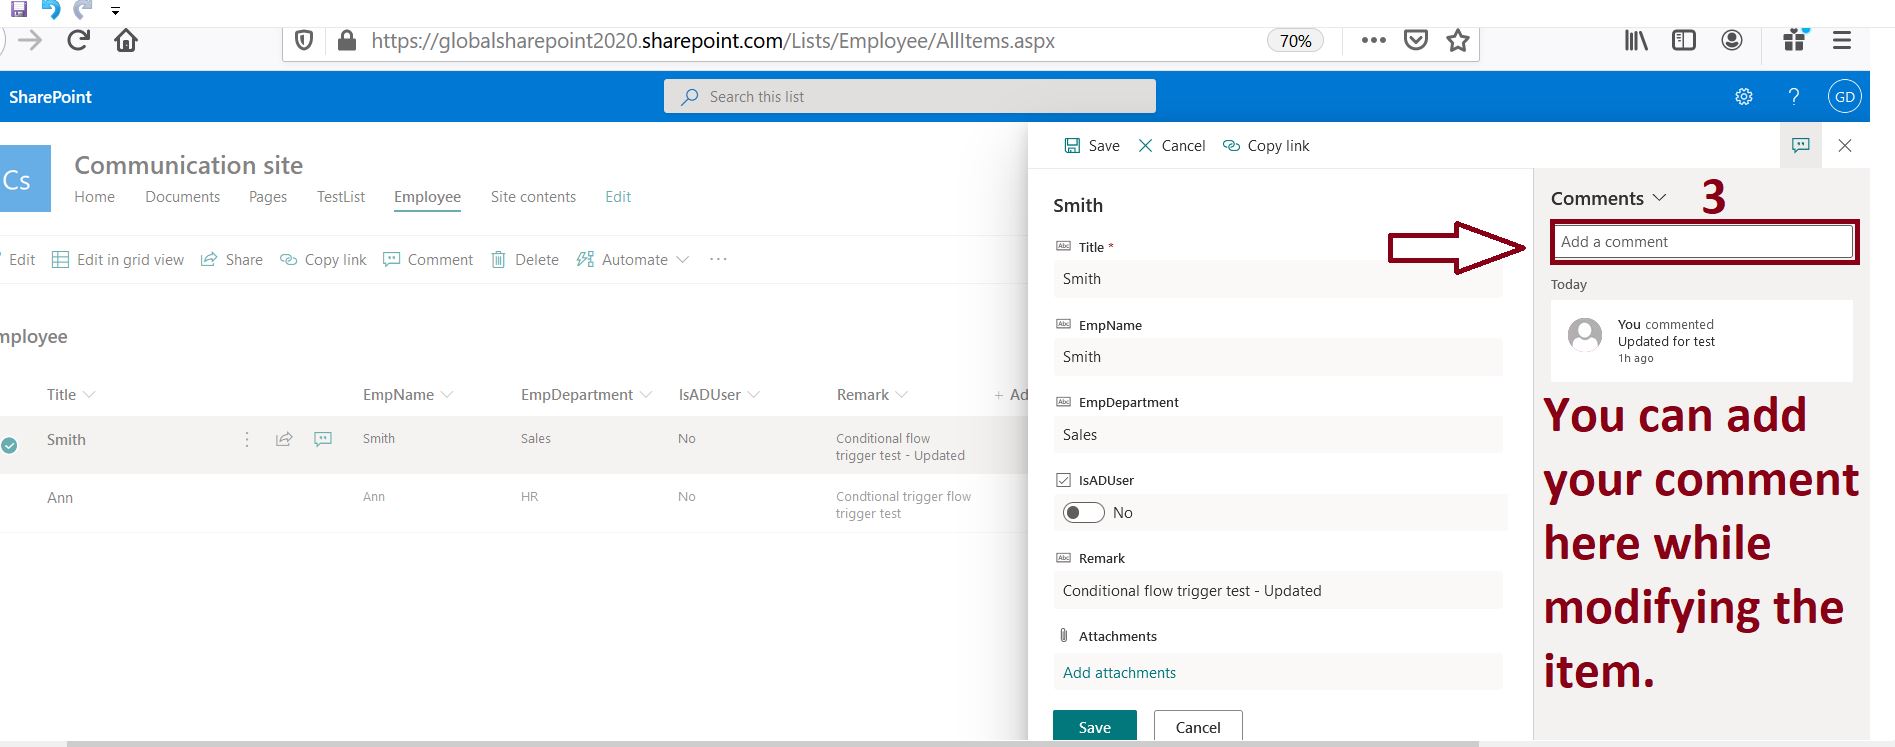 version history in SharePoint Online, add a comment for SharePoint Online list item modification